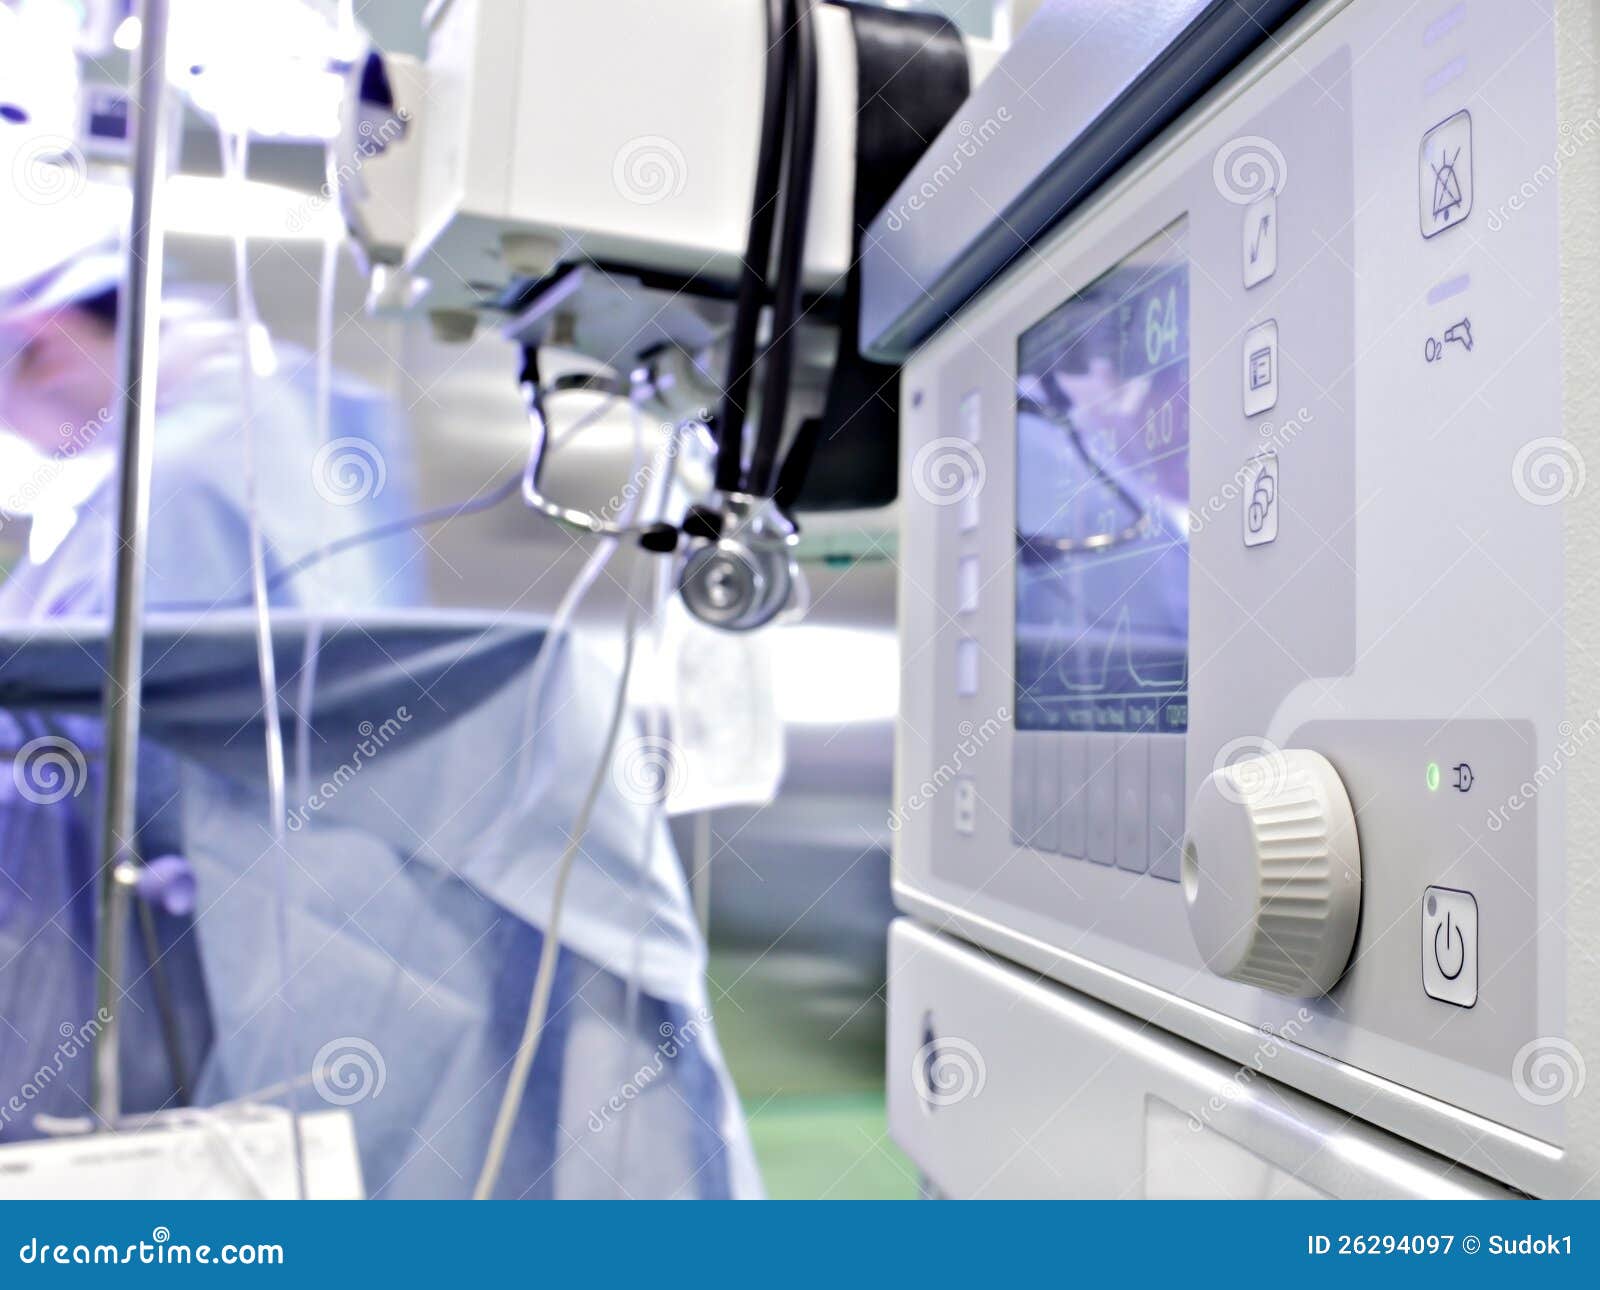 medical device in the operating room. anesthetic machine